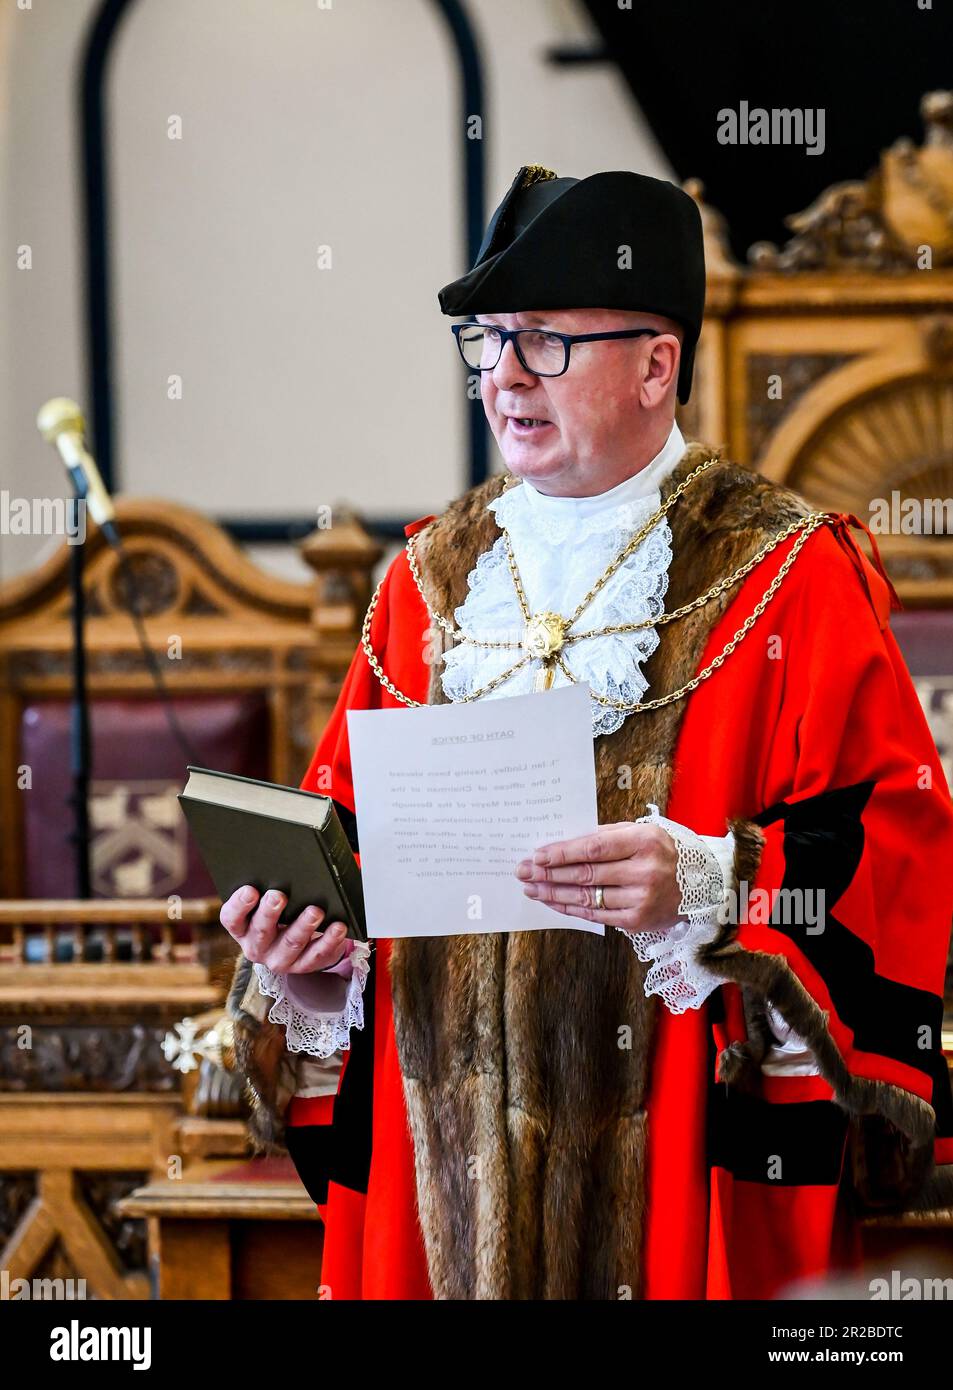 Grimsby, UK, 18th May, 2023. Councillor Ian Lindley is sworn in as newly elected Mayor, during the annual North East Lincolnshire Council Mayor-making ceremony held at Grimsby Town Hall.Councillor Ian Lindley was elected to the role of Mayor of the Borough of North East Lincolnshire, with Councillor Steve Beasant elected to Deputy Mayor of the Borough. 18th May 2023 Photo by Jon Corken, Grimsby Town Hall, Grimsby, UK. Credit: Jon Corken/Alamy Live News Stock Photo